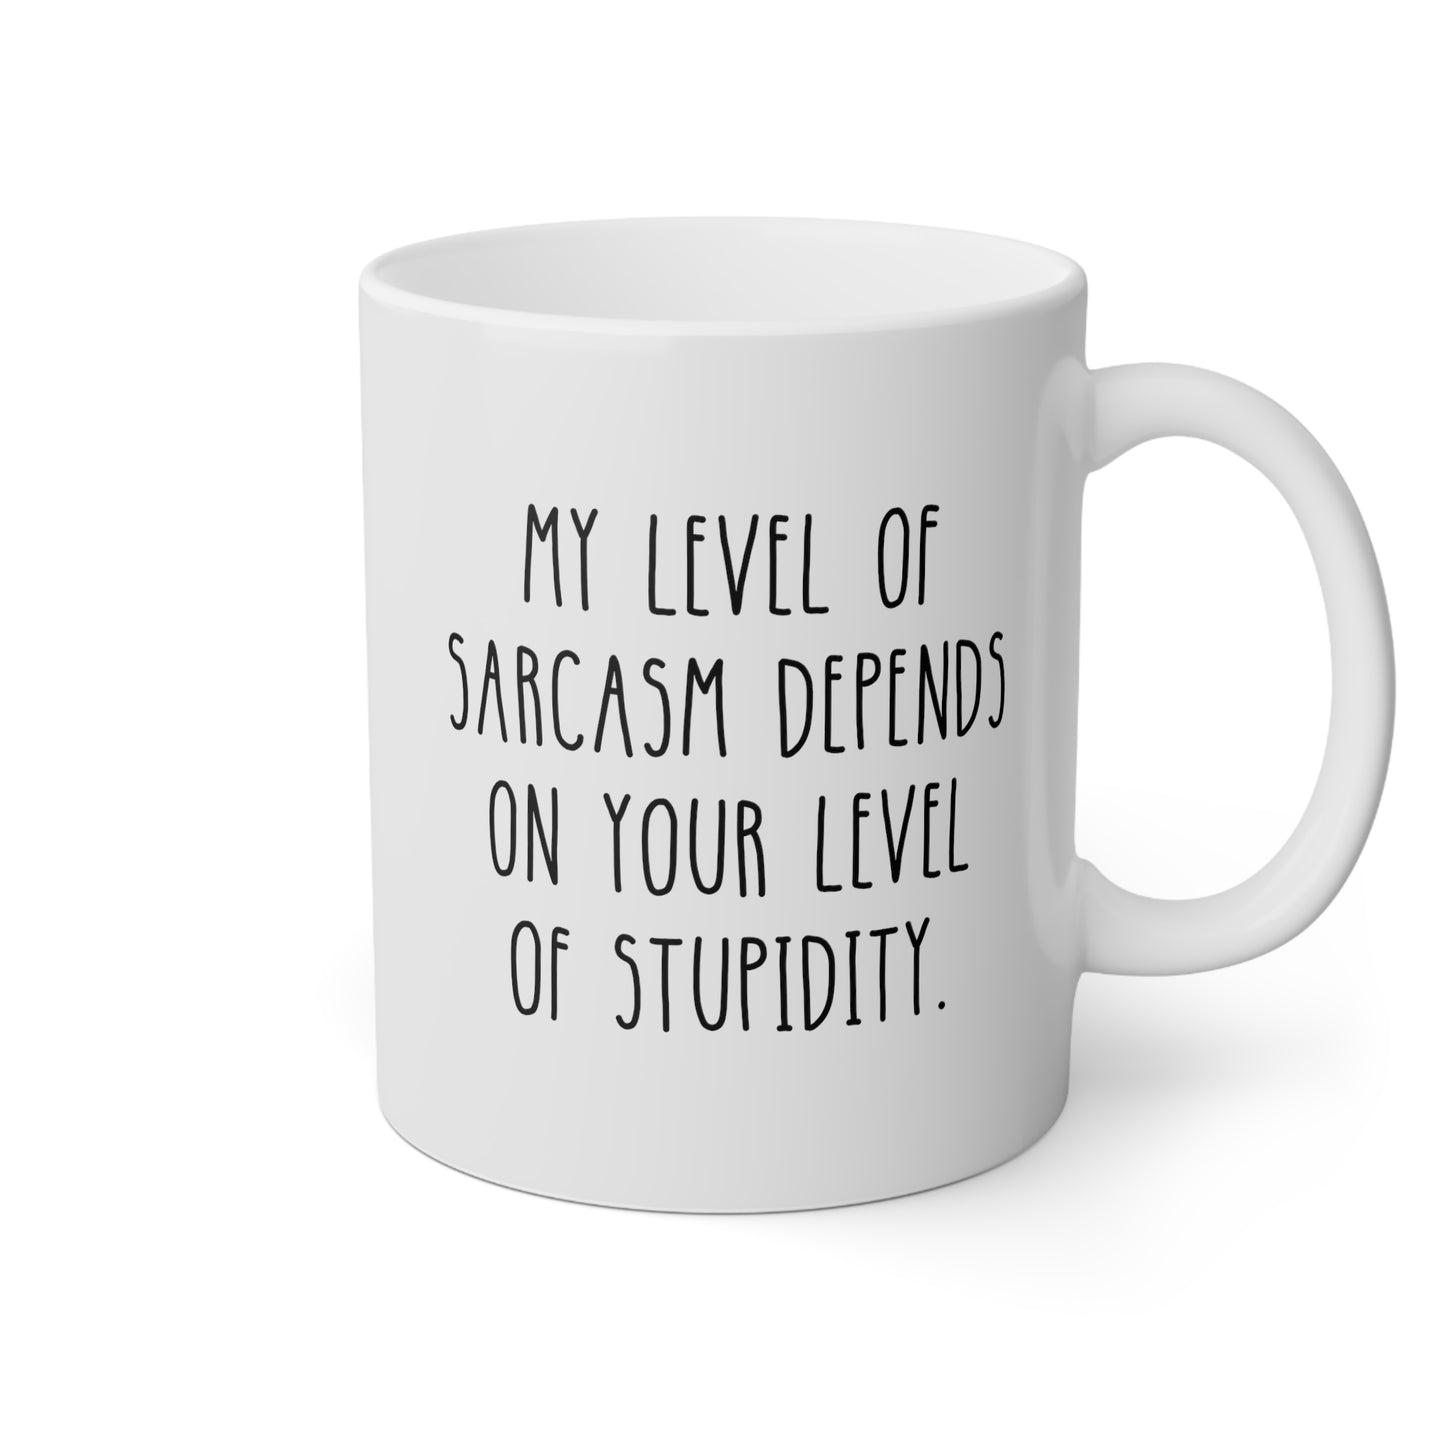 My Level Of Sarcasm Depends On Your Level Of Stupidity 11oz white funny large coffee mug gift novelty ceramic cup sarcastic waveywares wavey wares wavywares wavy wares